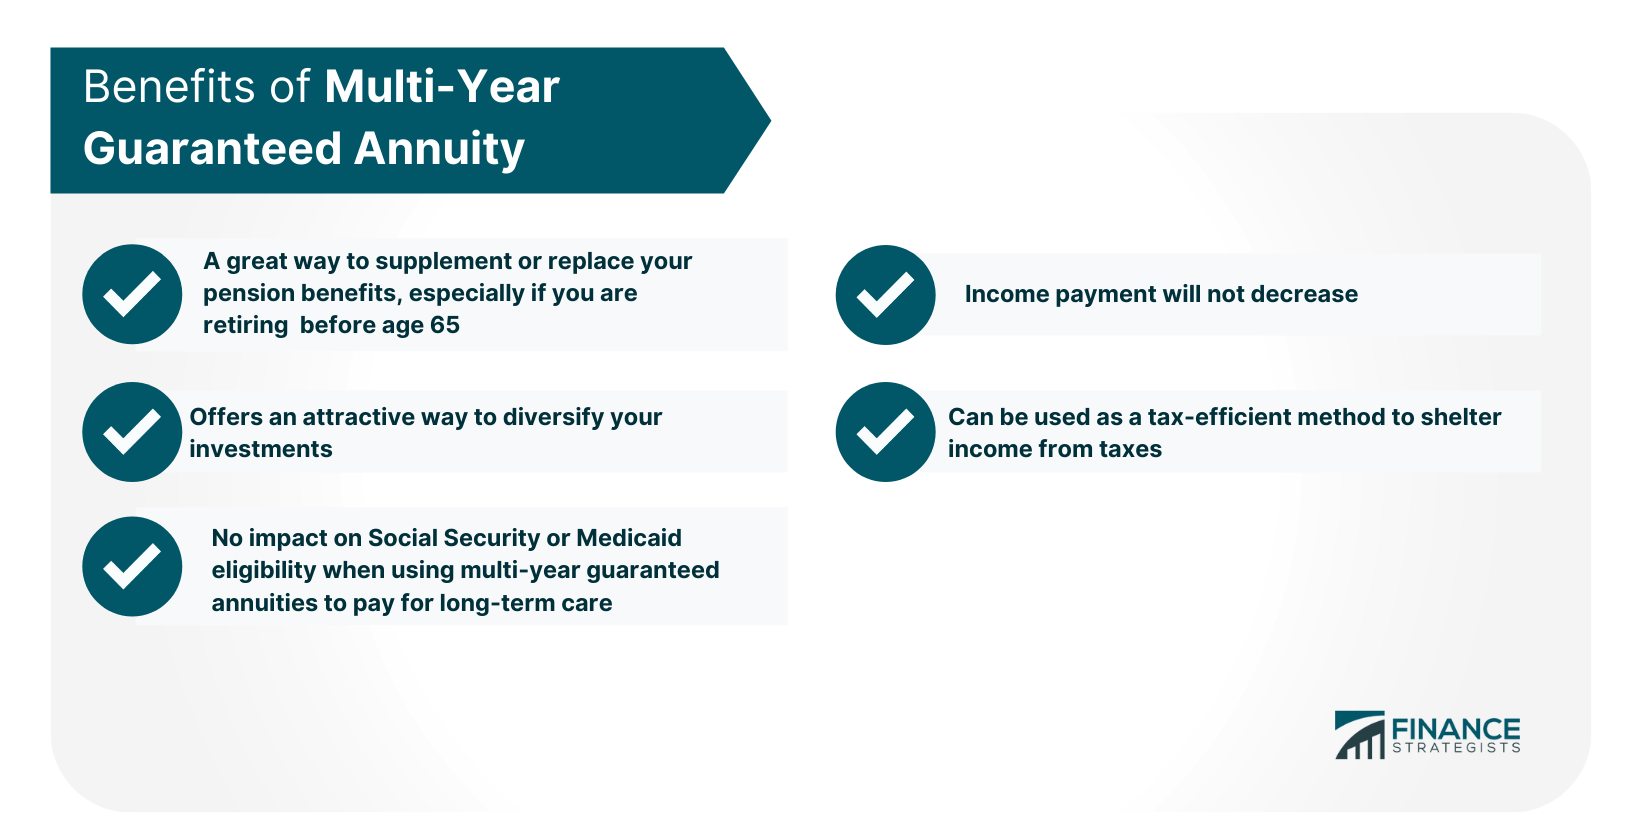 Benefits of Multi-Year Guaranteed Annuity